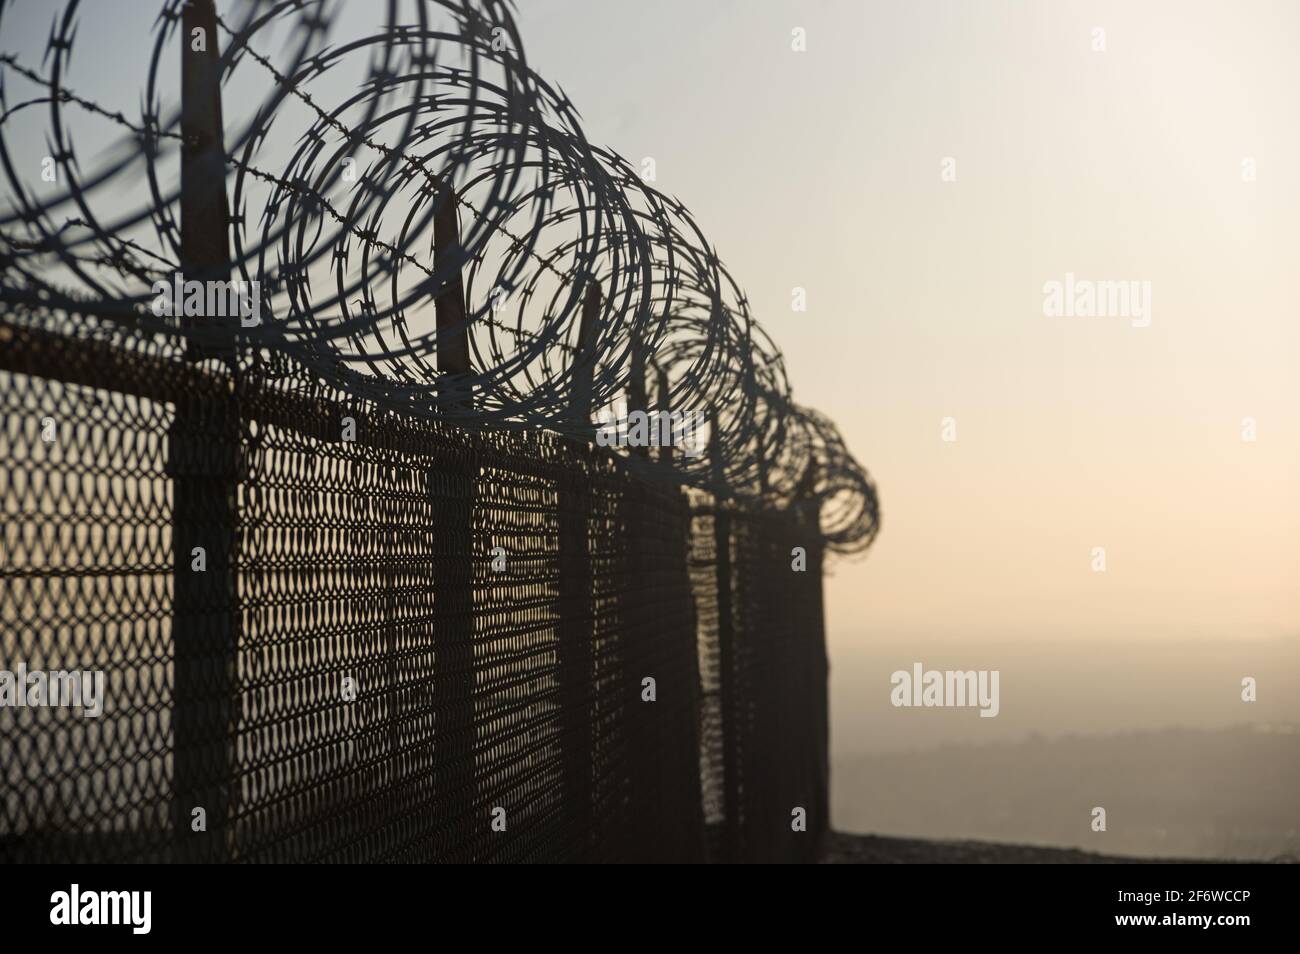 razor wire chain link fence with shallow depth of field Stock Photo